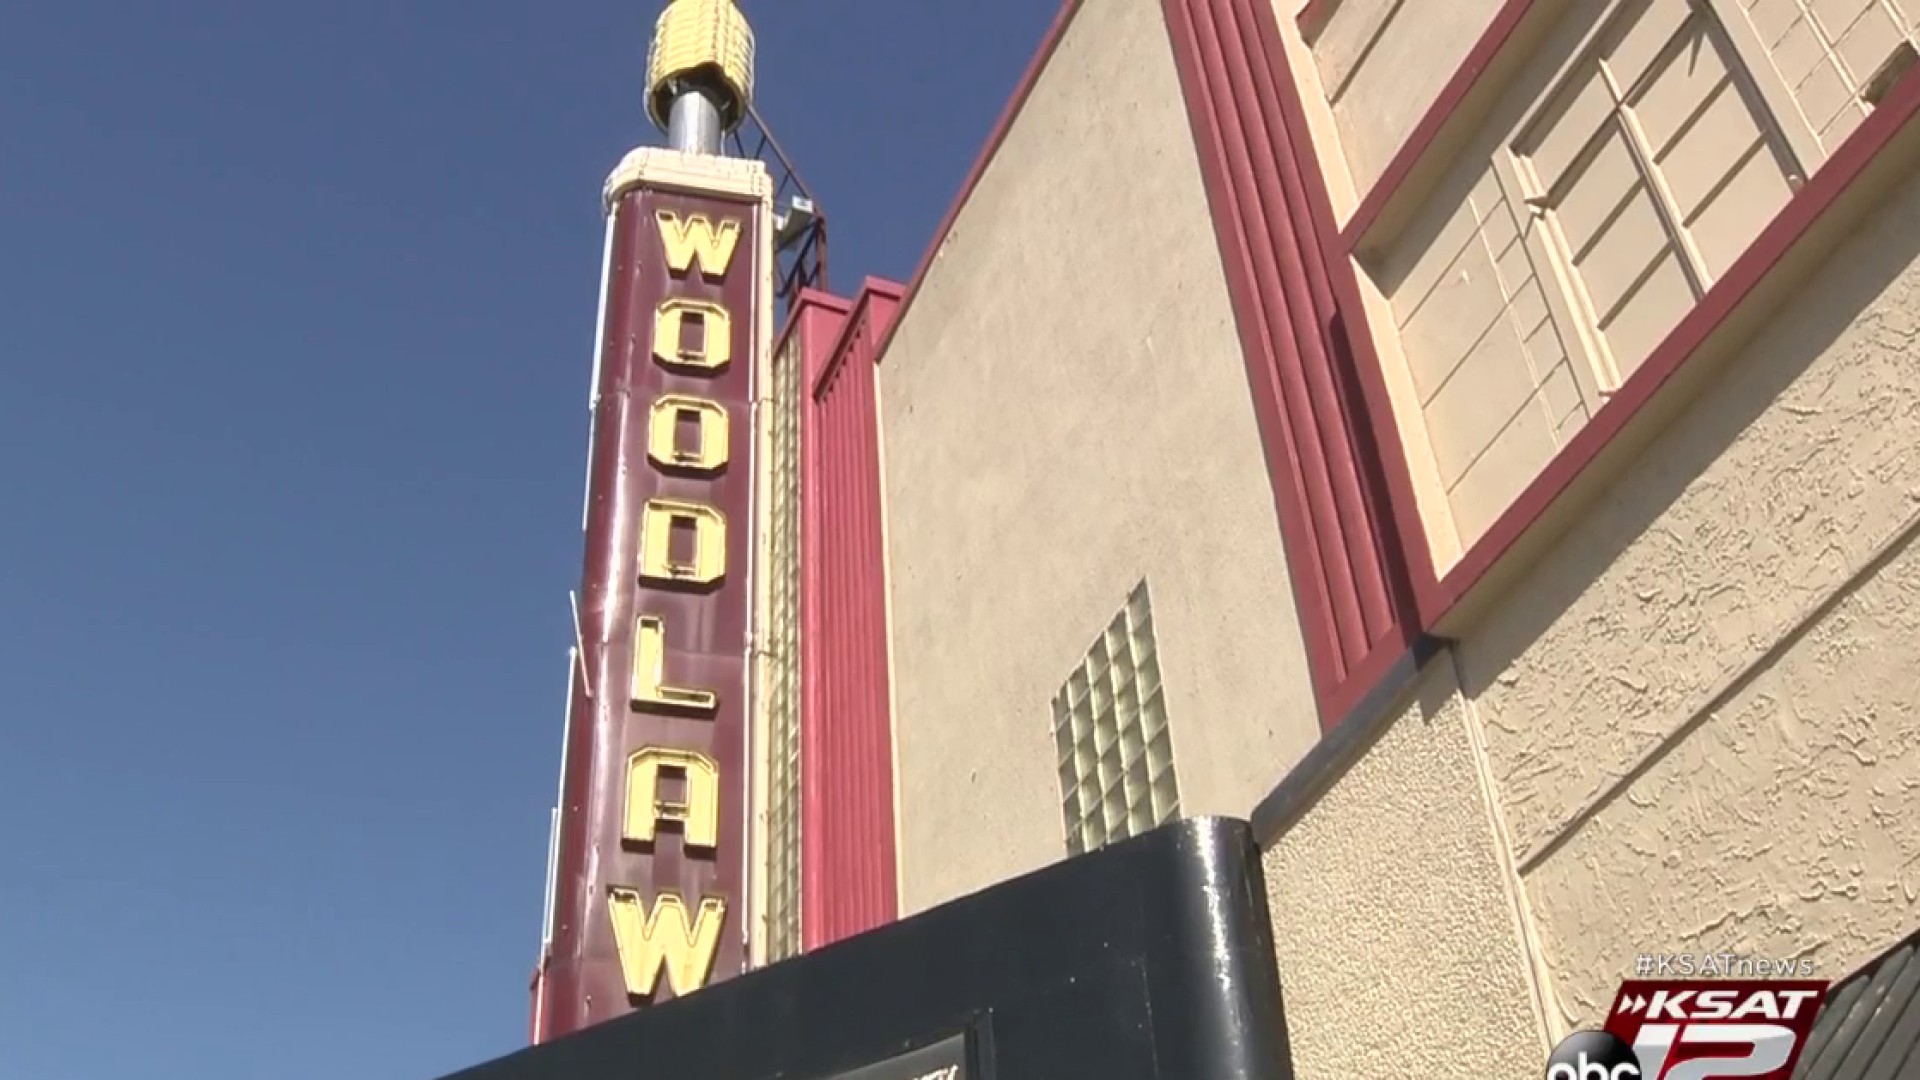 Glimmer of hope': Woodlawn Theater, Public Theater of SA hope to reopen  their doors after pandemic forces closures